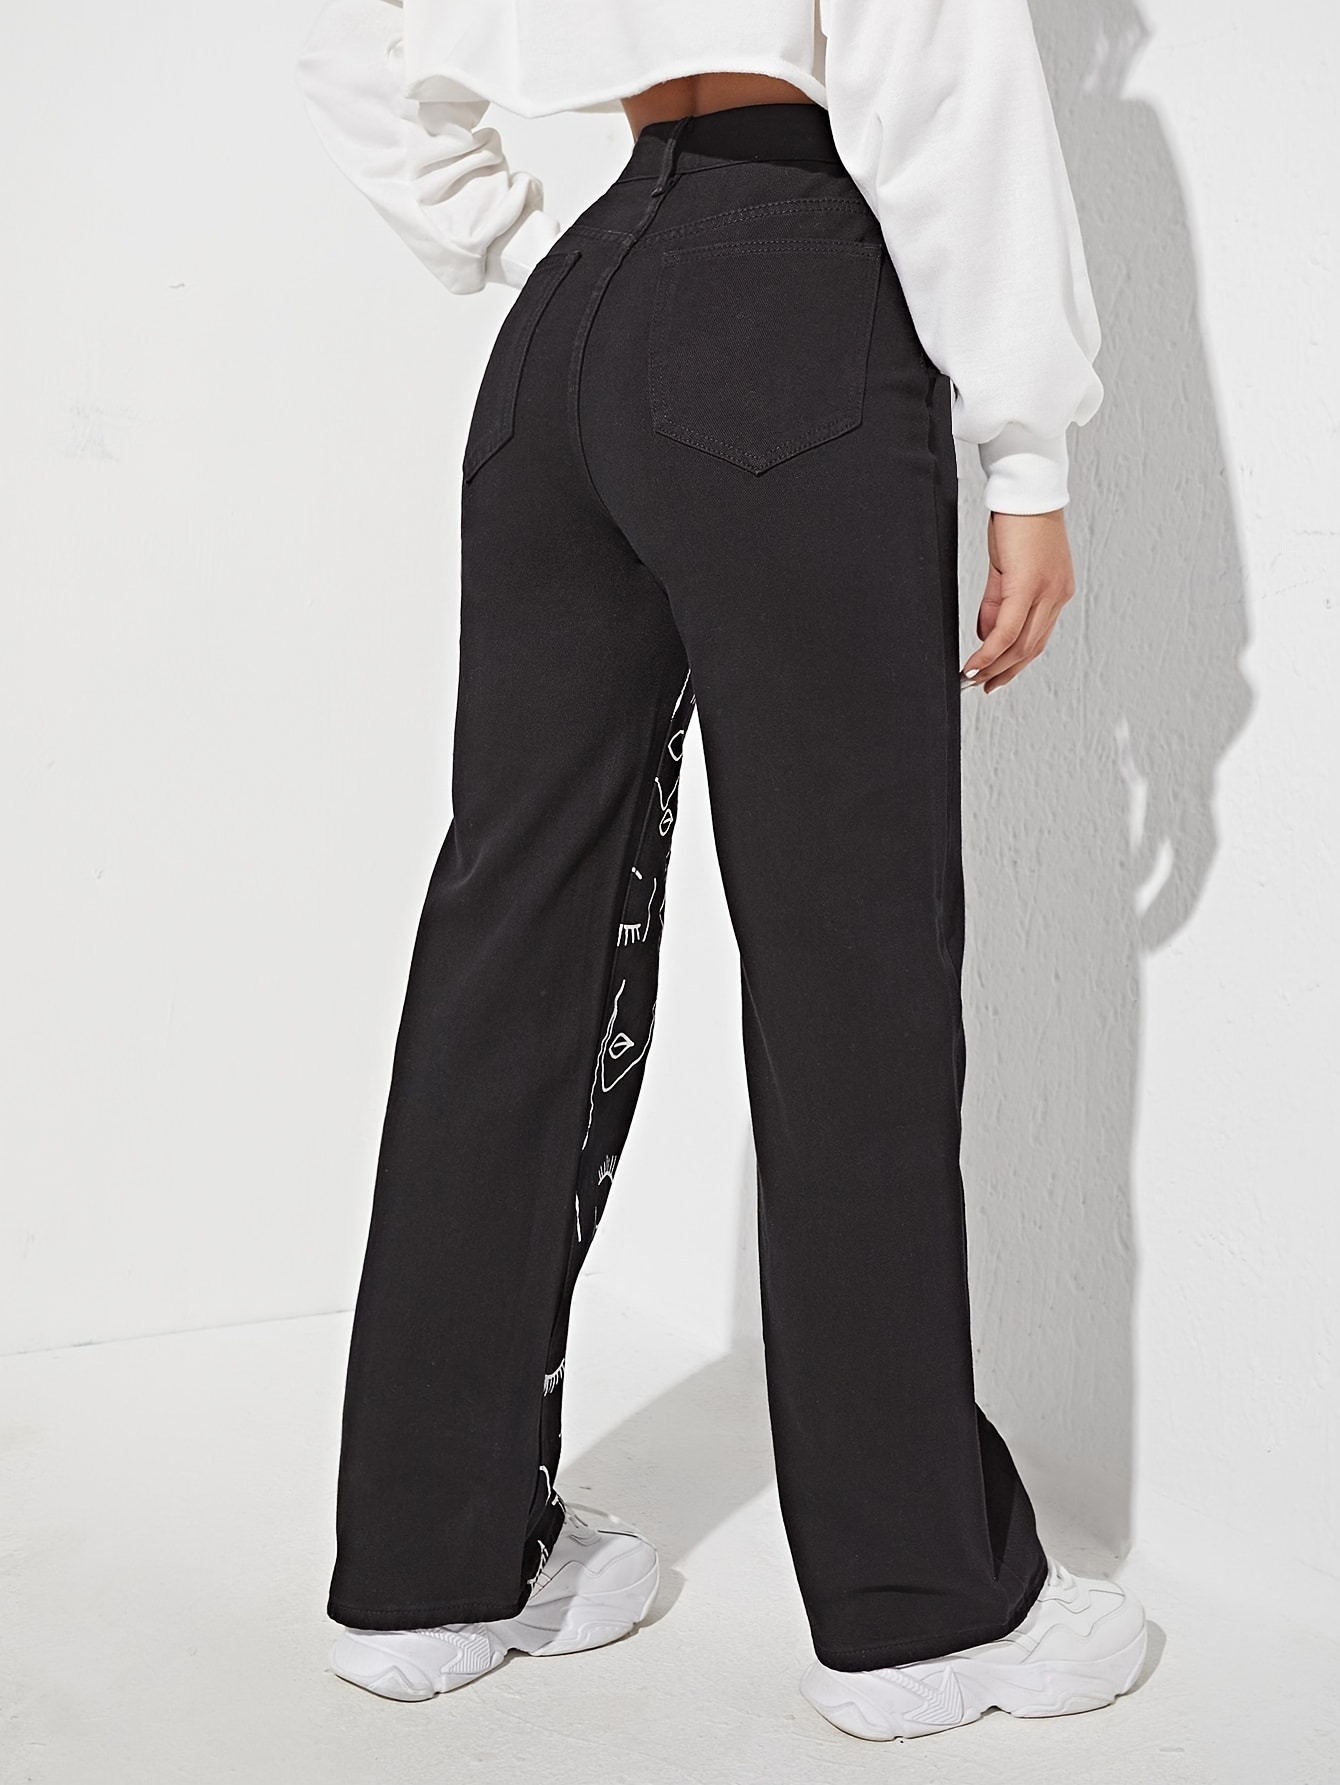 Women's black jeans with printed pocket